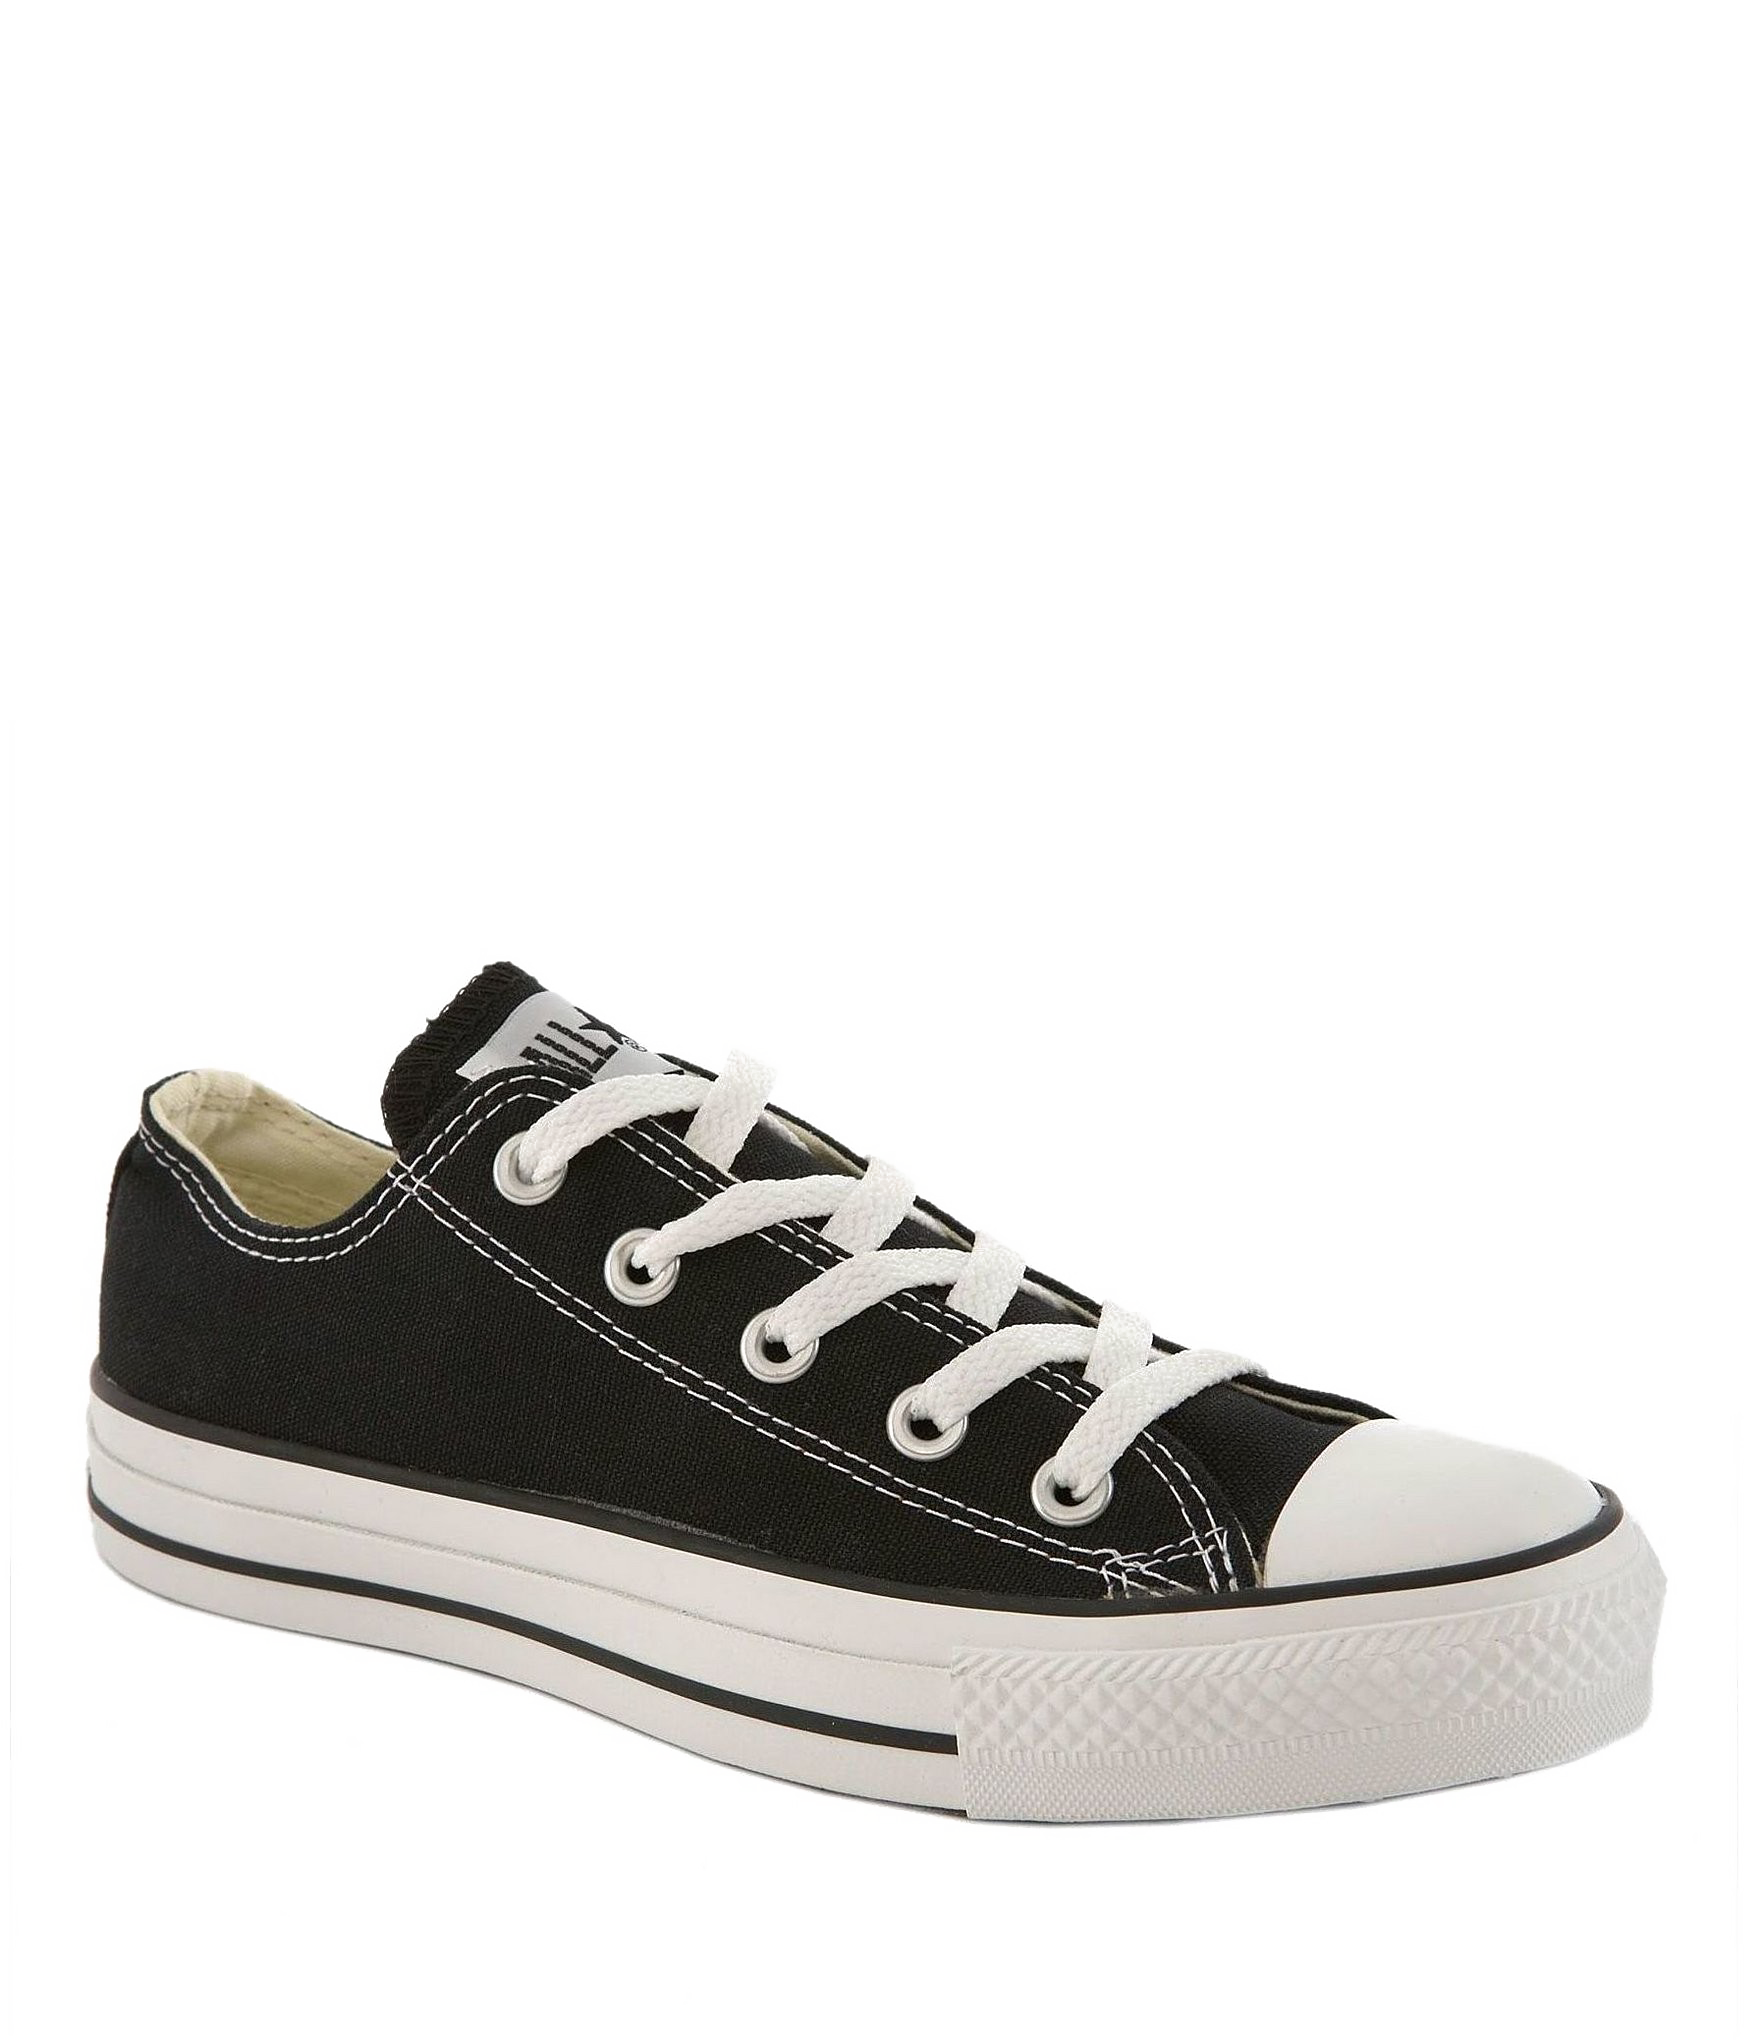 Download Sneakers Photos Free Clipart HD HQ PNG Image | FreePNGImg